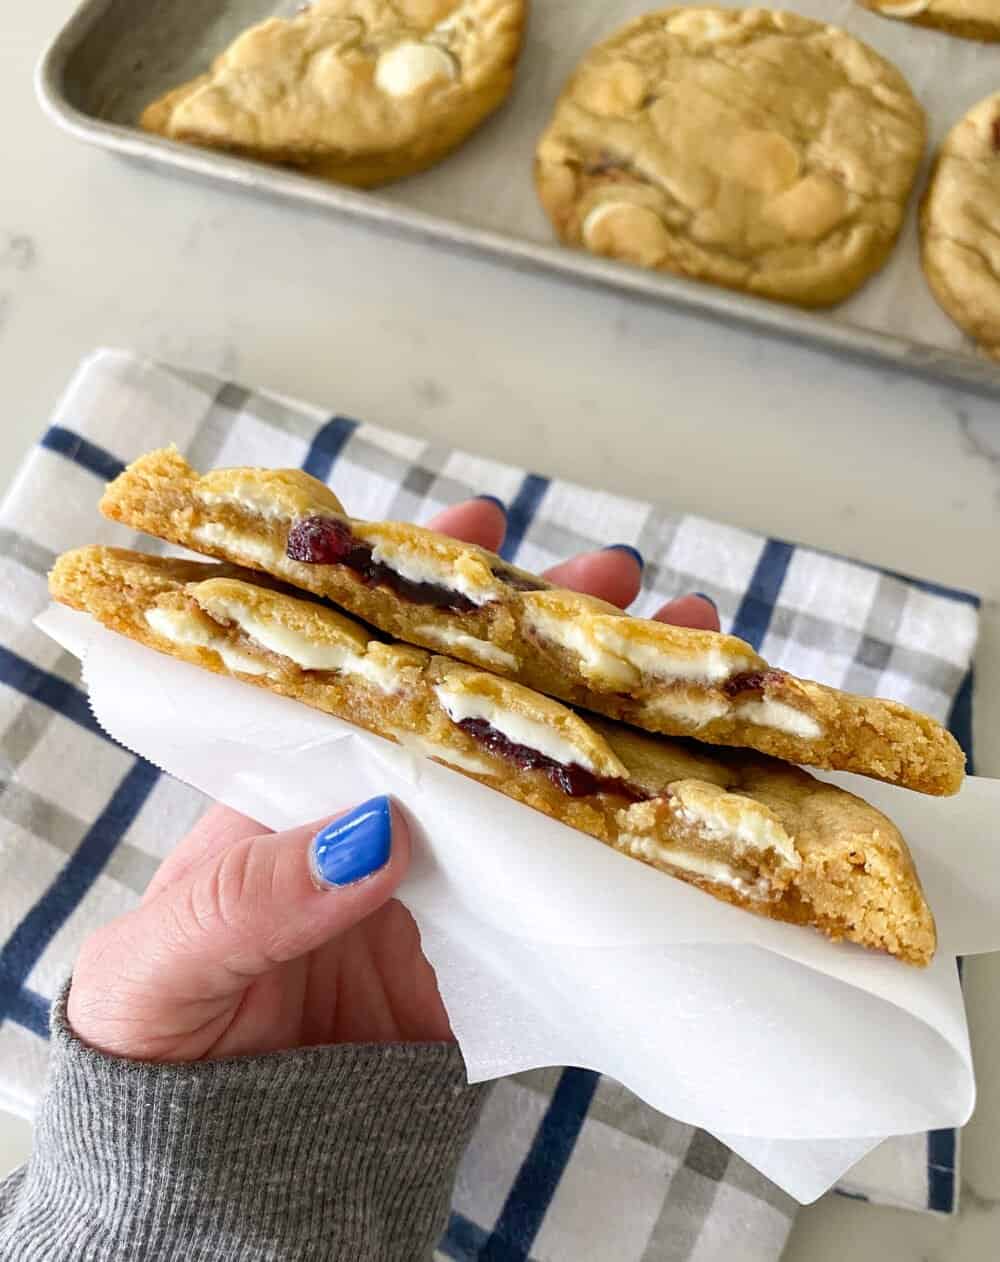 stuffed peanut butter and jelly cookies cut in half